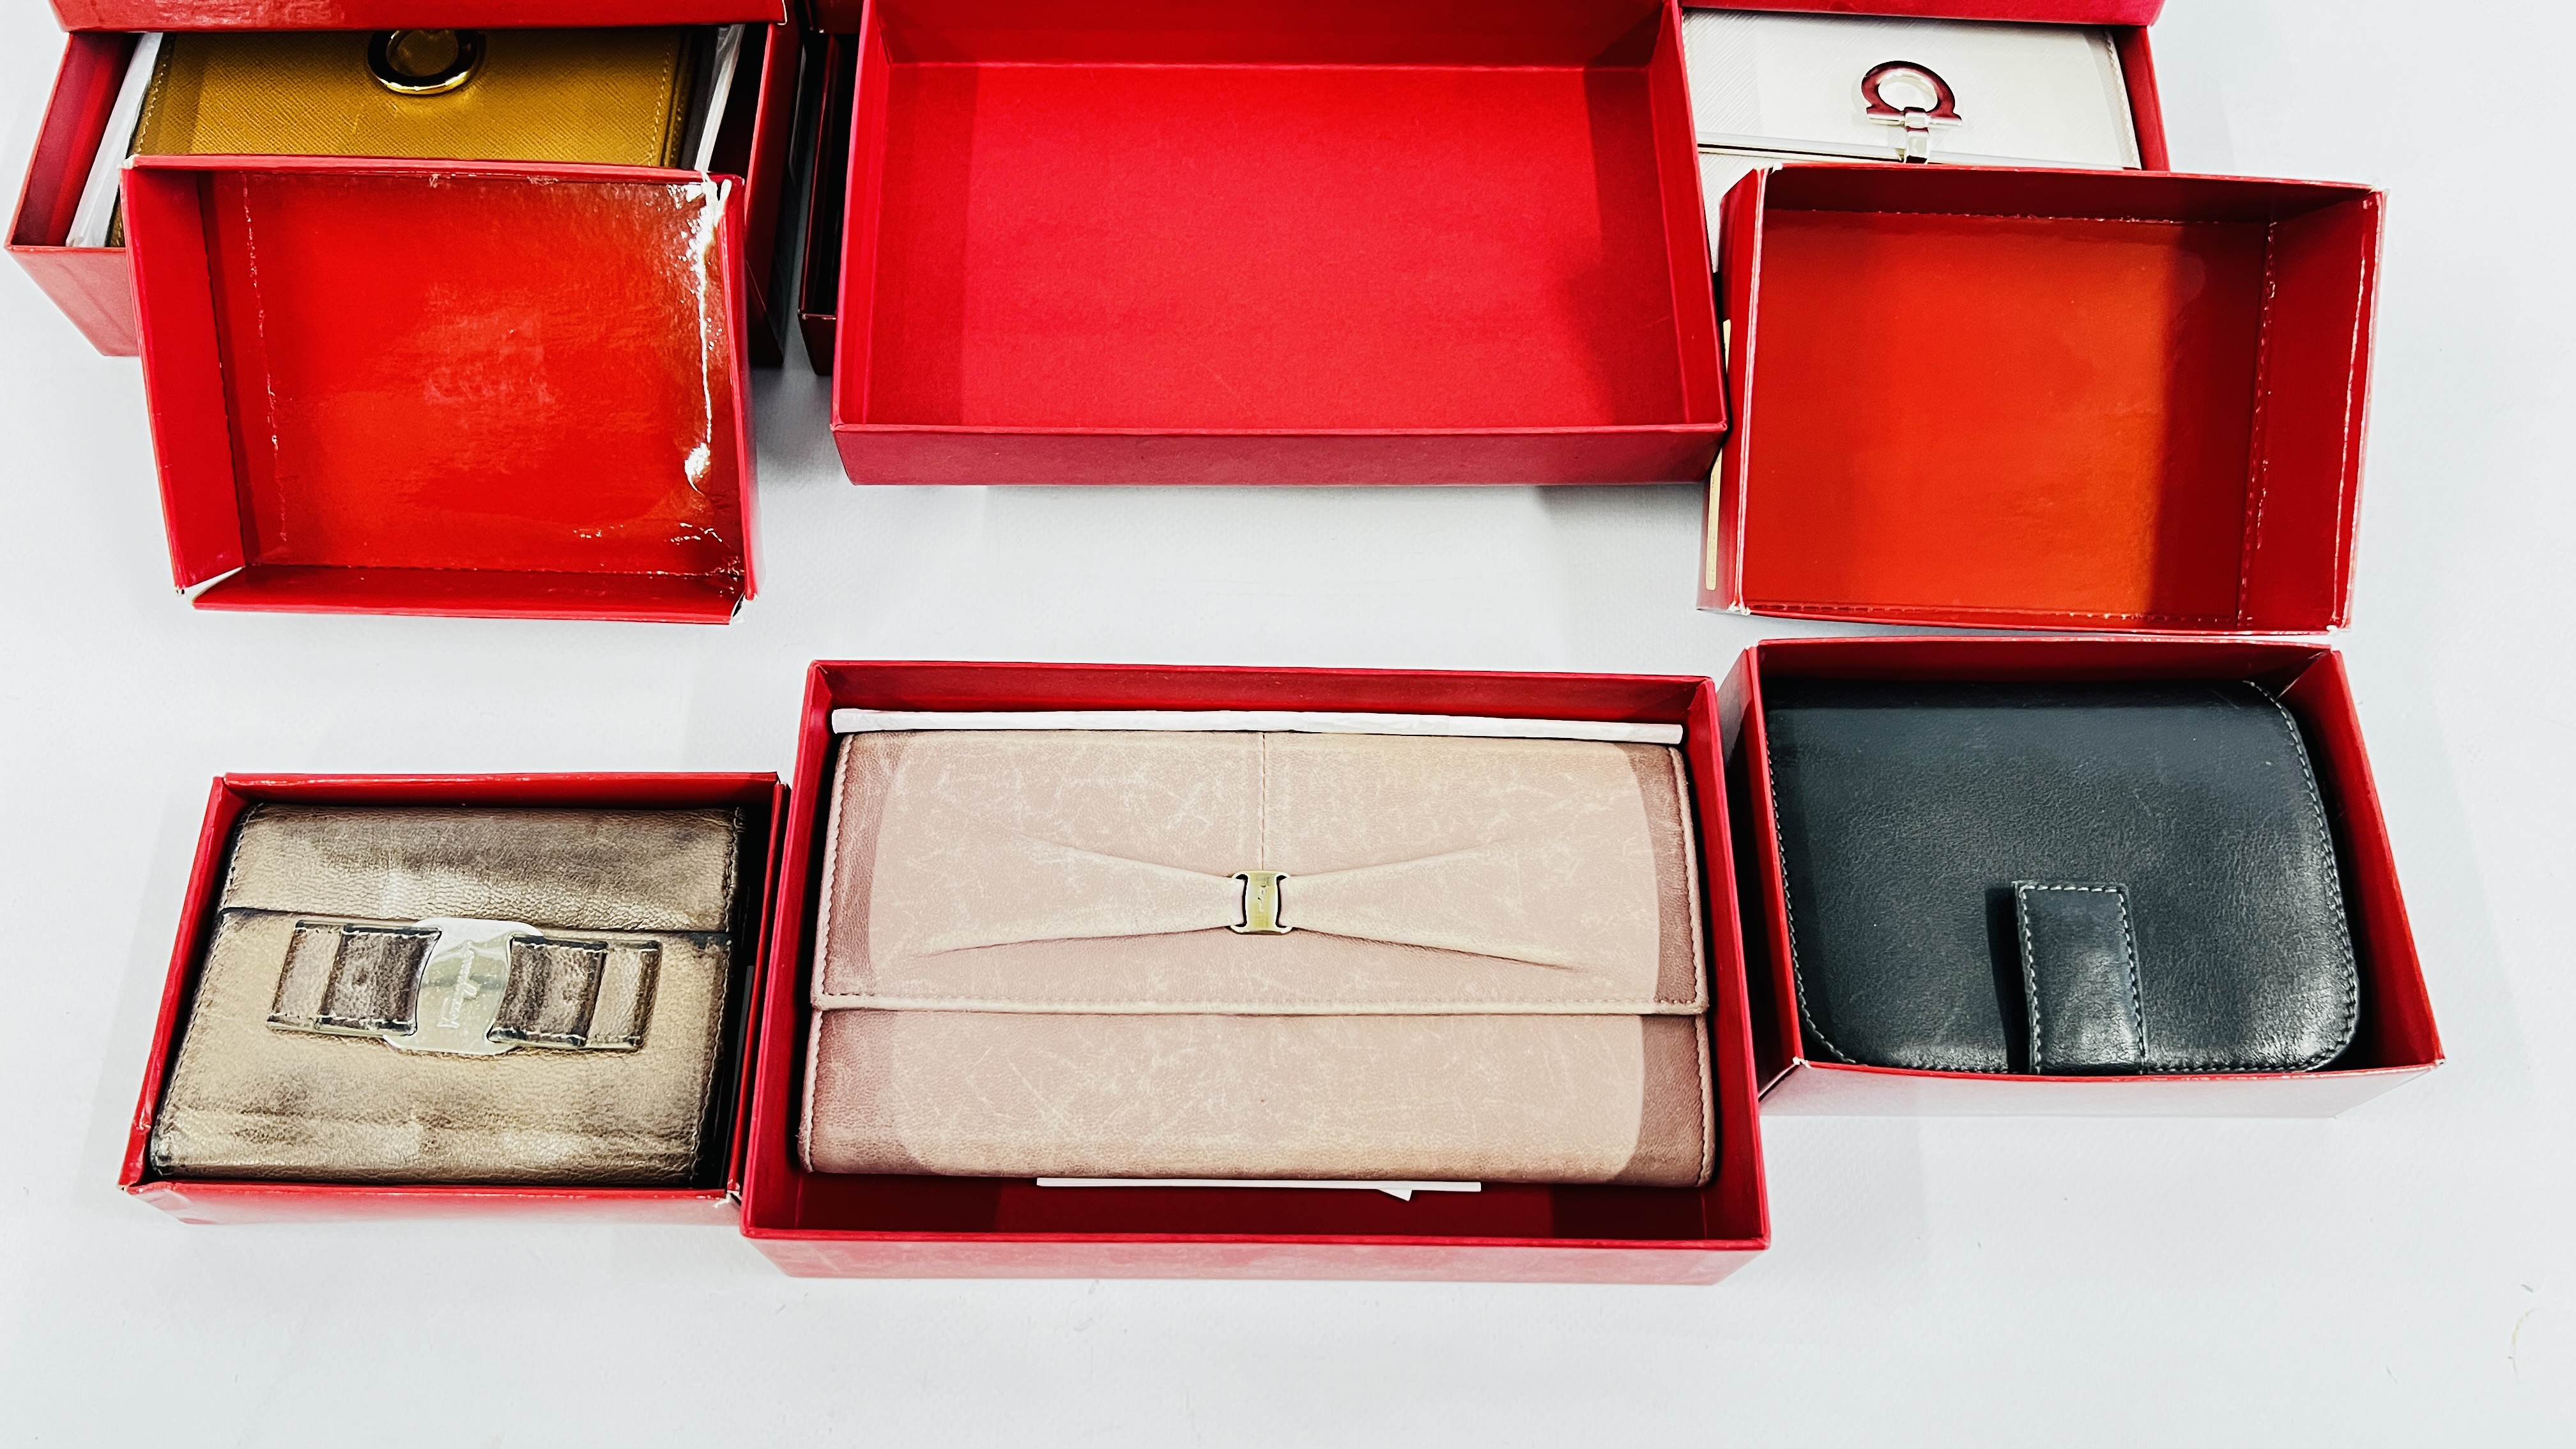 A GROUP OF 6 BOXED DESIGNER PURSES MARKED "SALVADOR FERRAGAMA". - Image 2 of 5